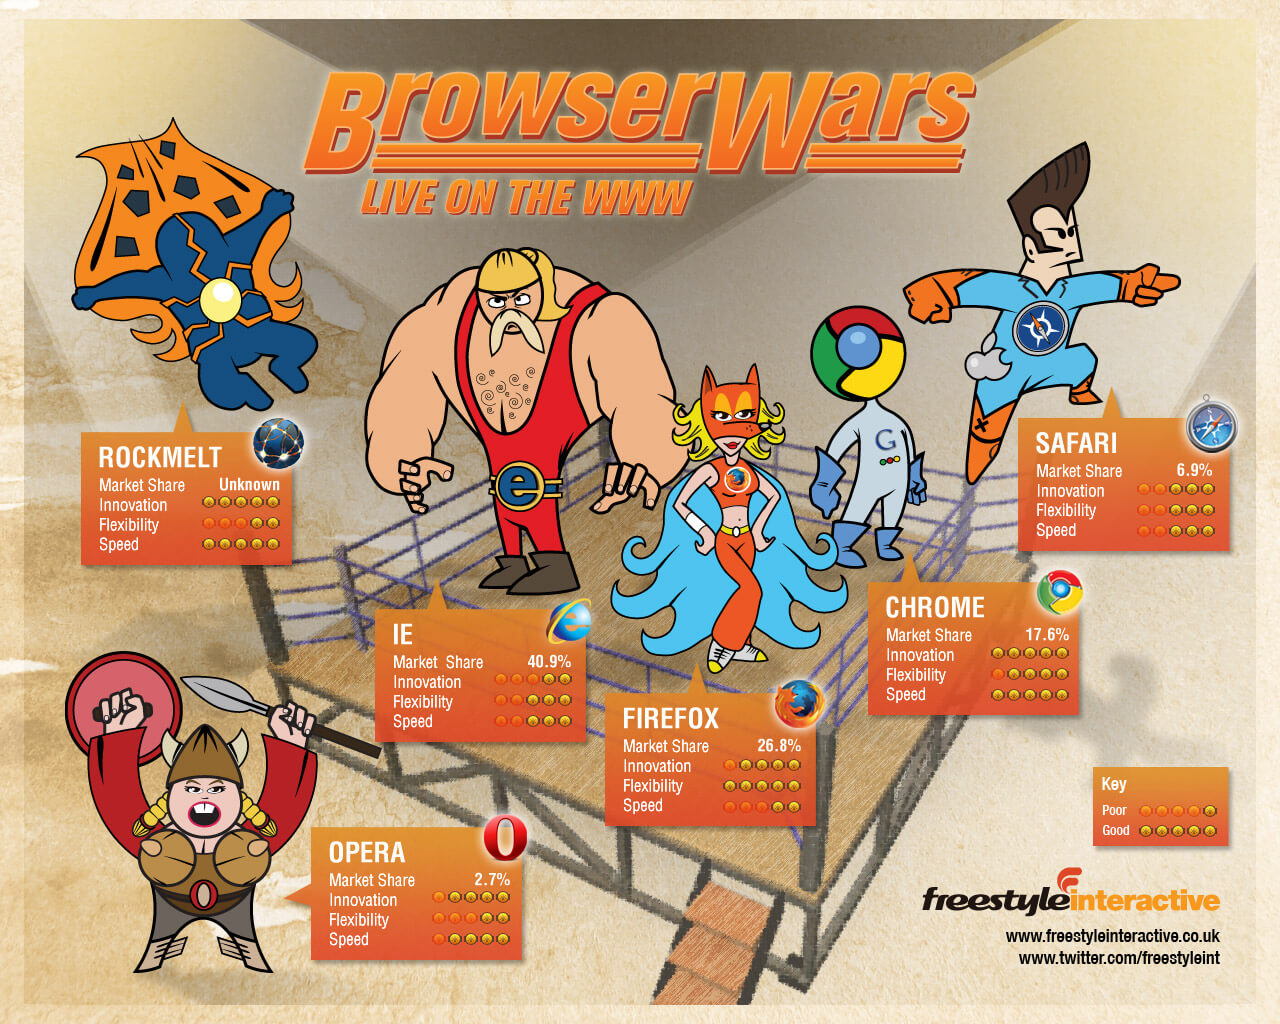 CBS-funded image of browsers wrestling.